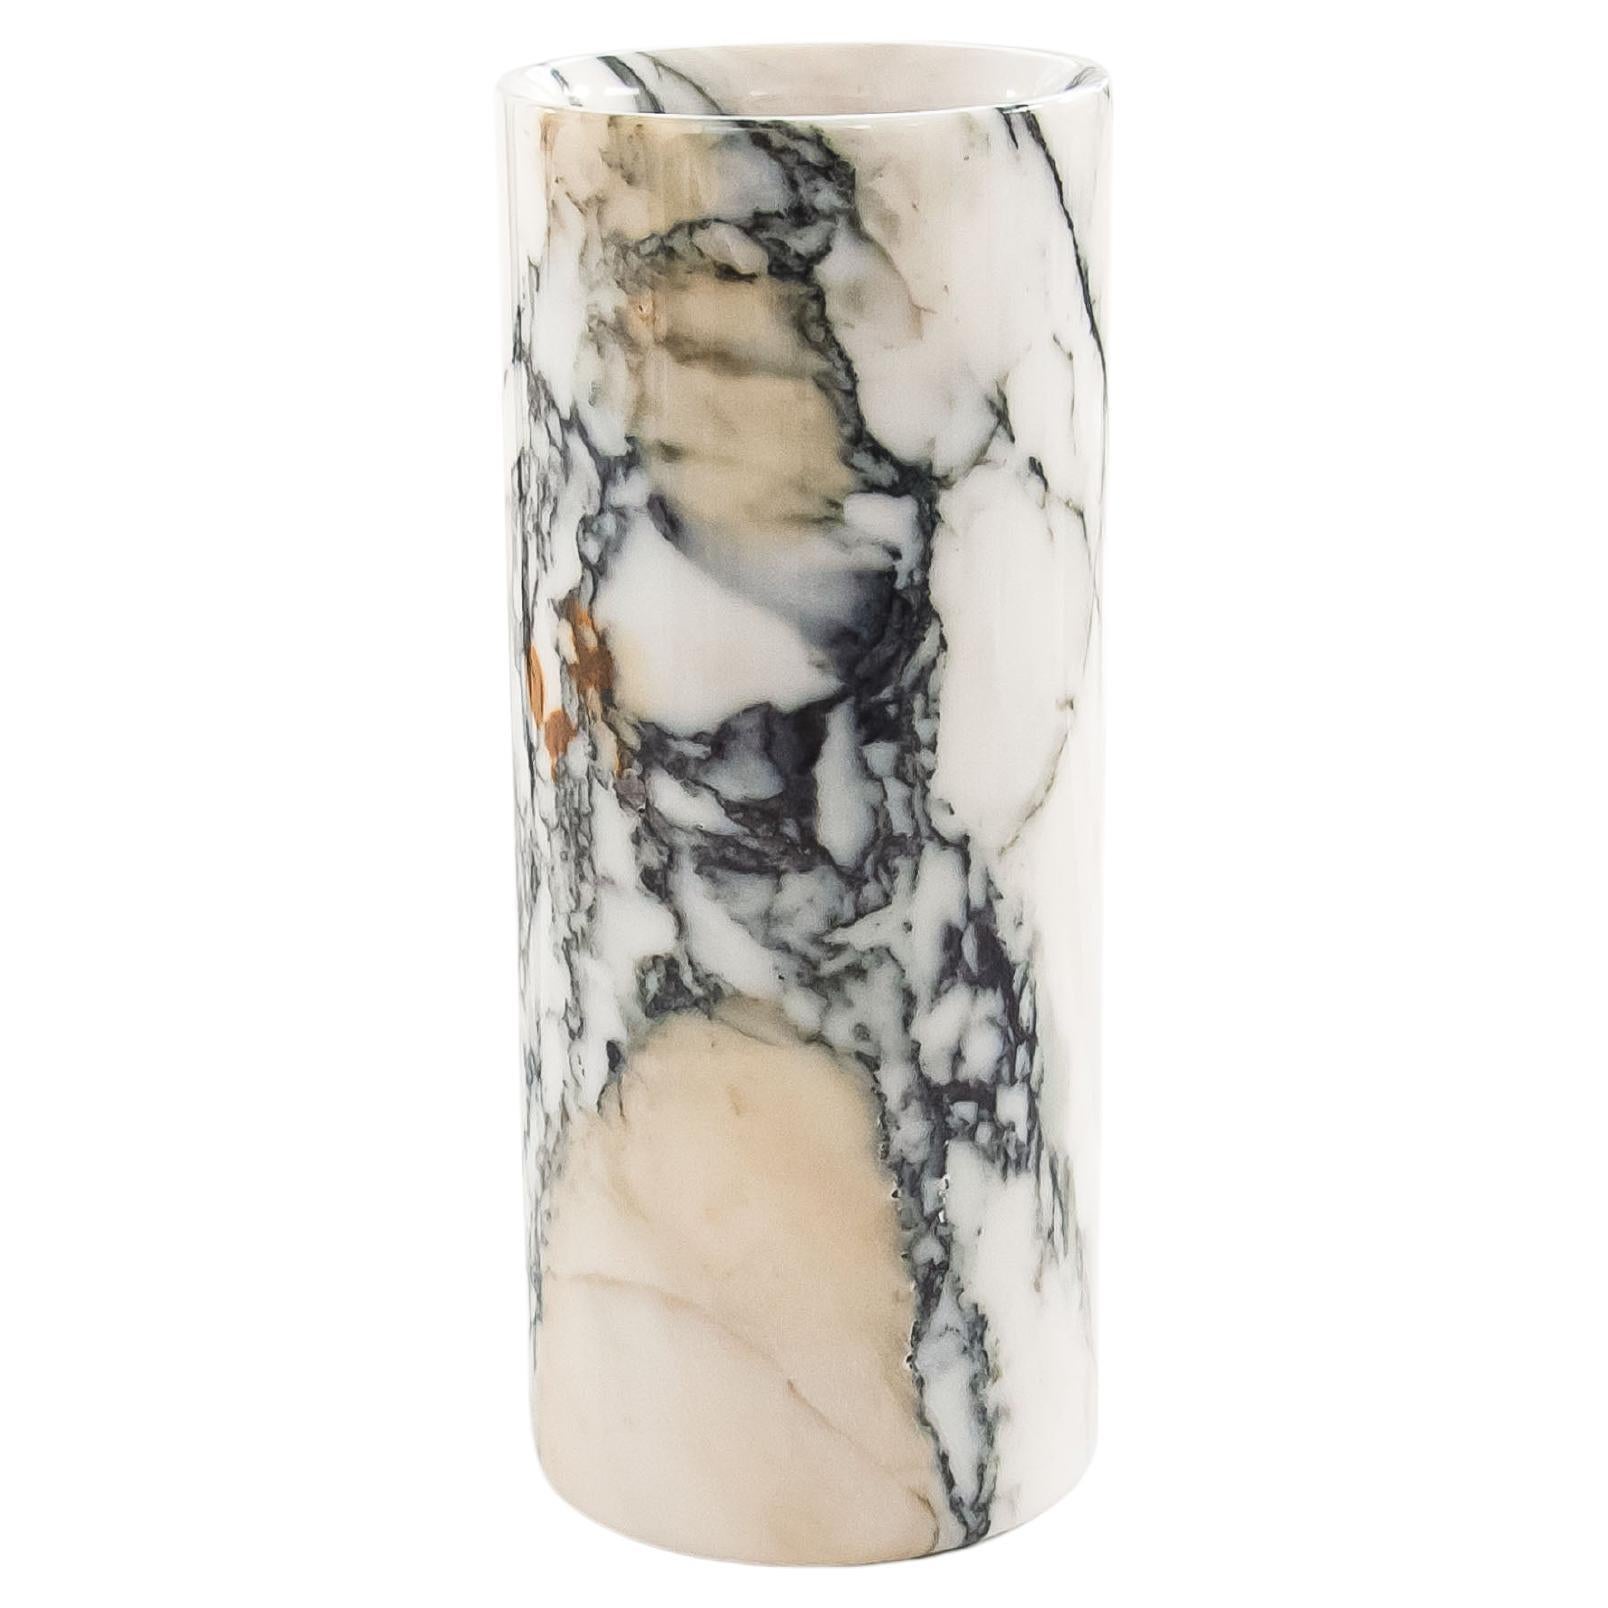 Cylindrical Paonazzo marble vase made in Italy, Carrara.

Each piece is in a way unique (since each marble block is different in veins and shades) and handcrafted in Italy. Slight variations in shape, color and size are to be considered a